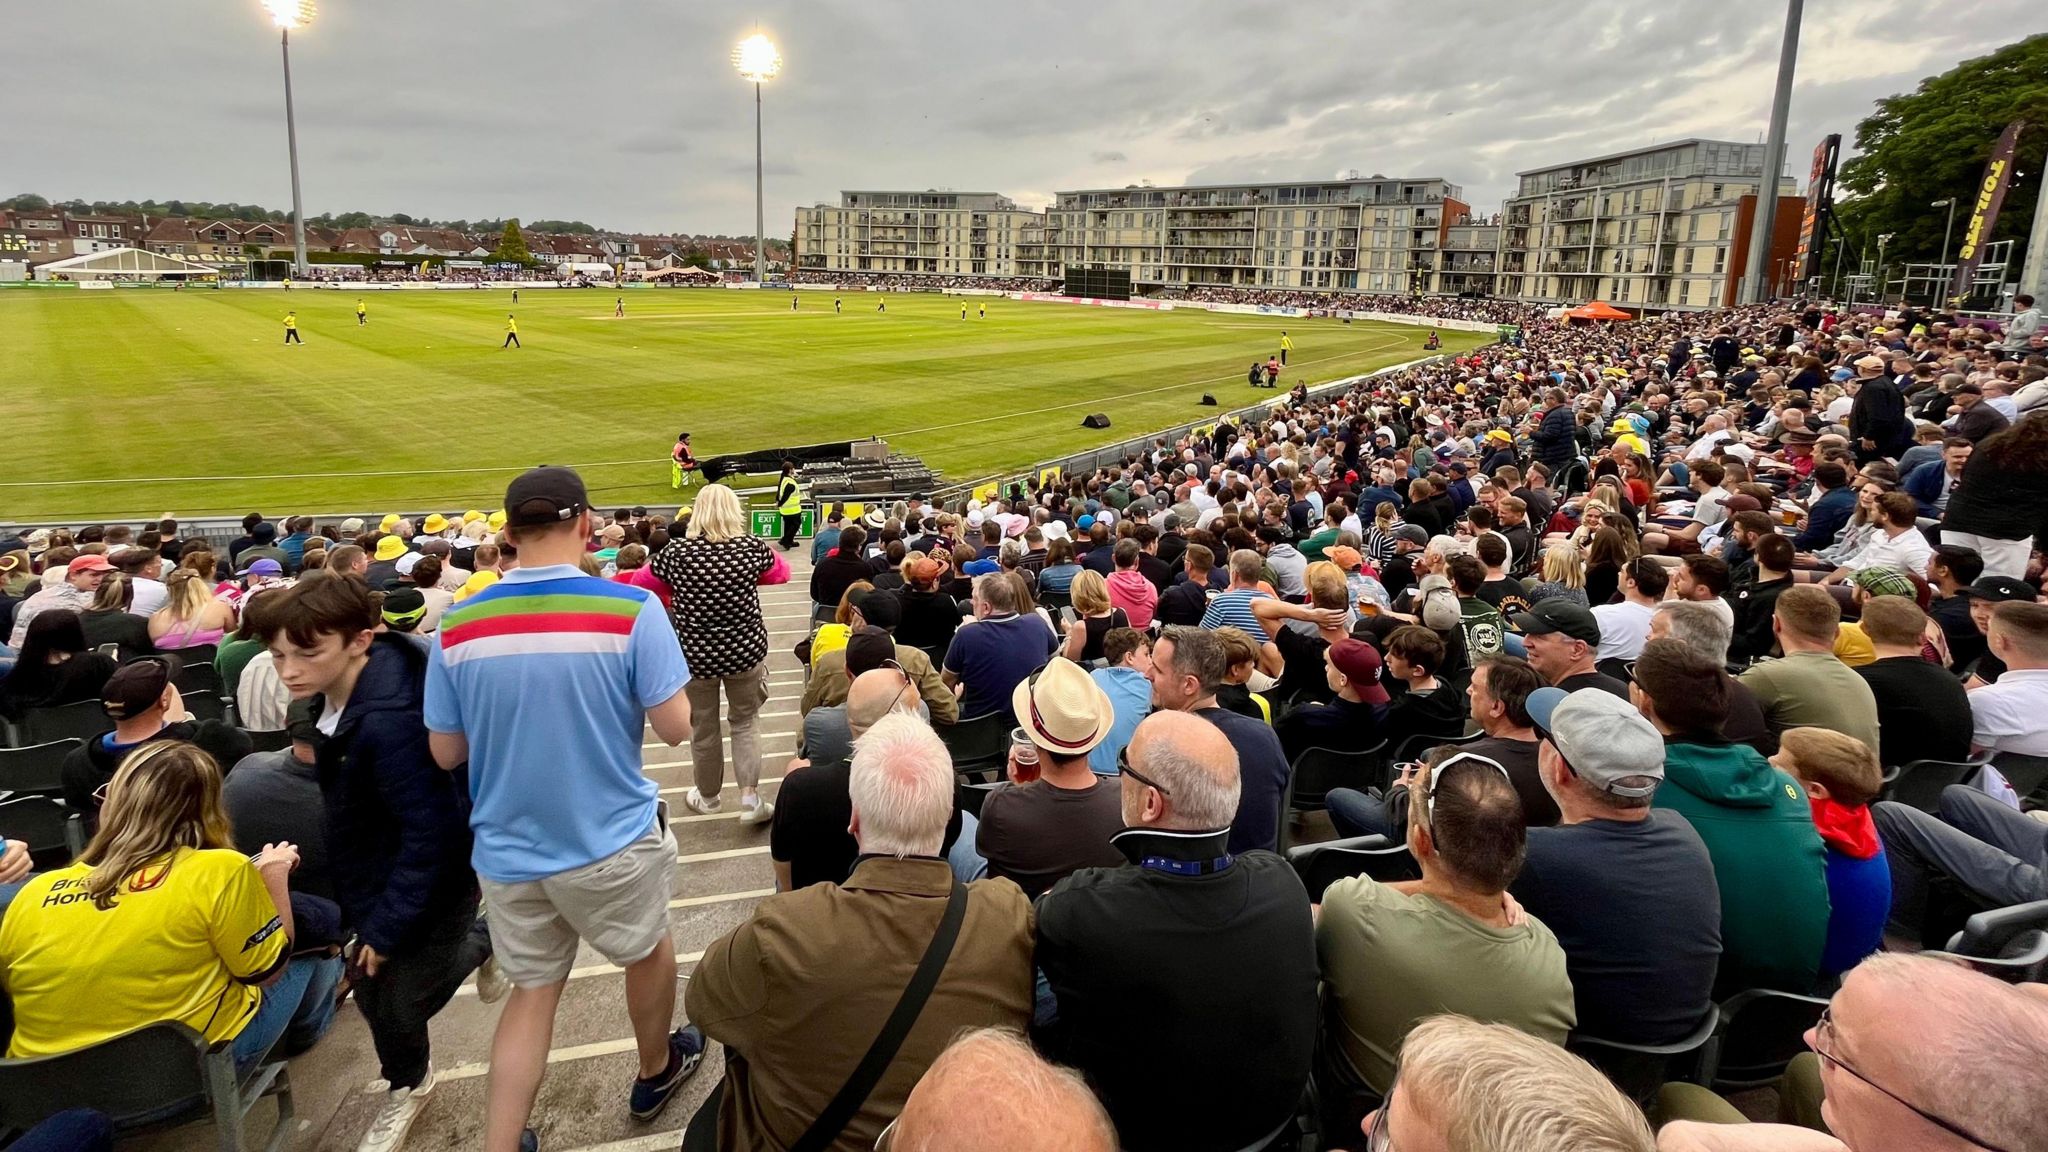 The crowd watch Gloucestershire play Somerset under floodlights in the Vitality Blast at the county ground in Bristol